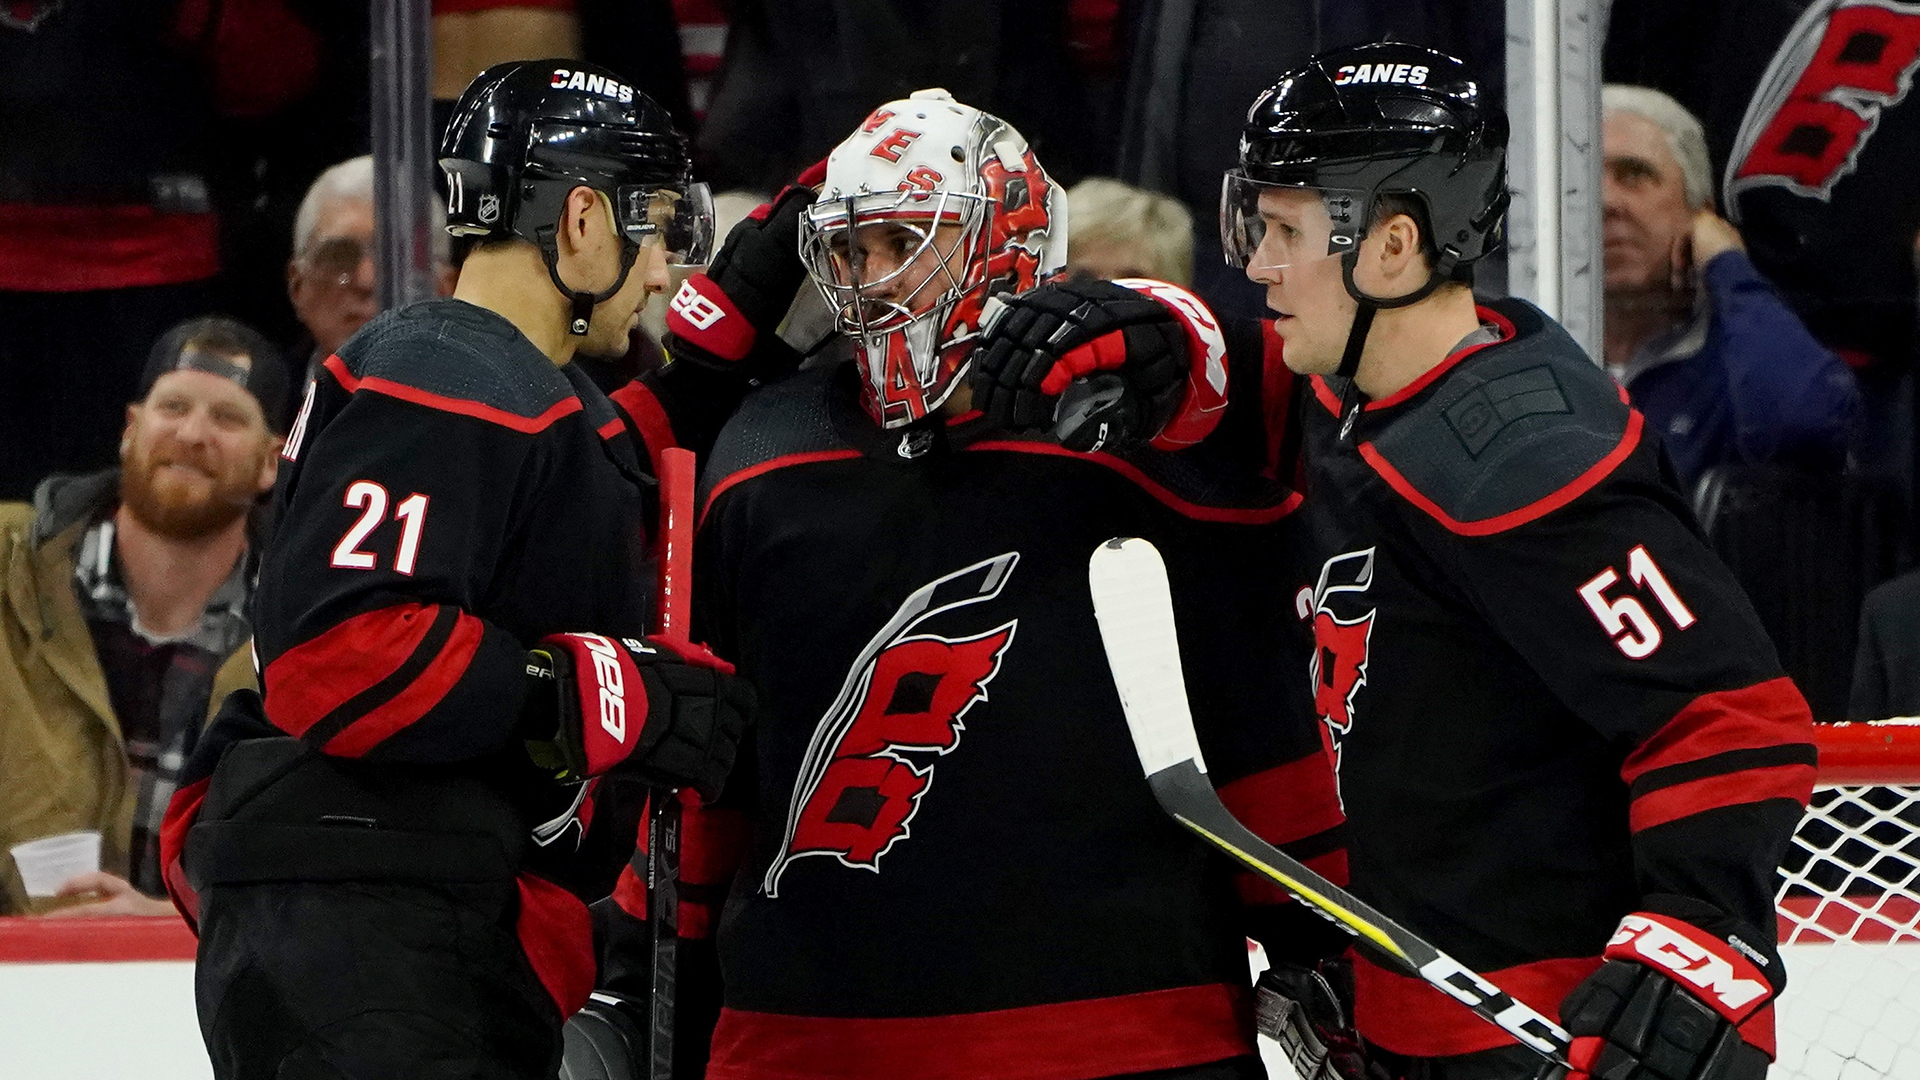 Hurricanes lose two goalies, but beat Leafs 6-3